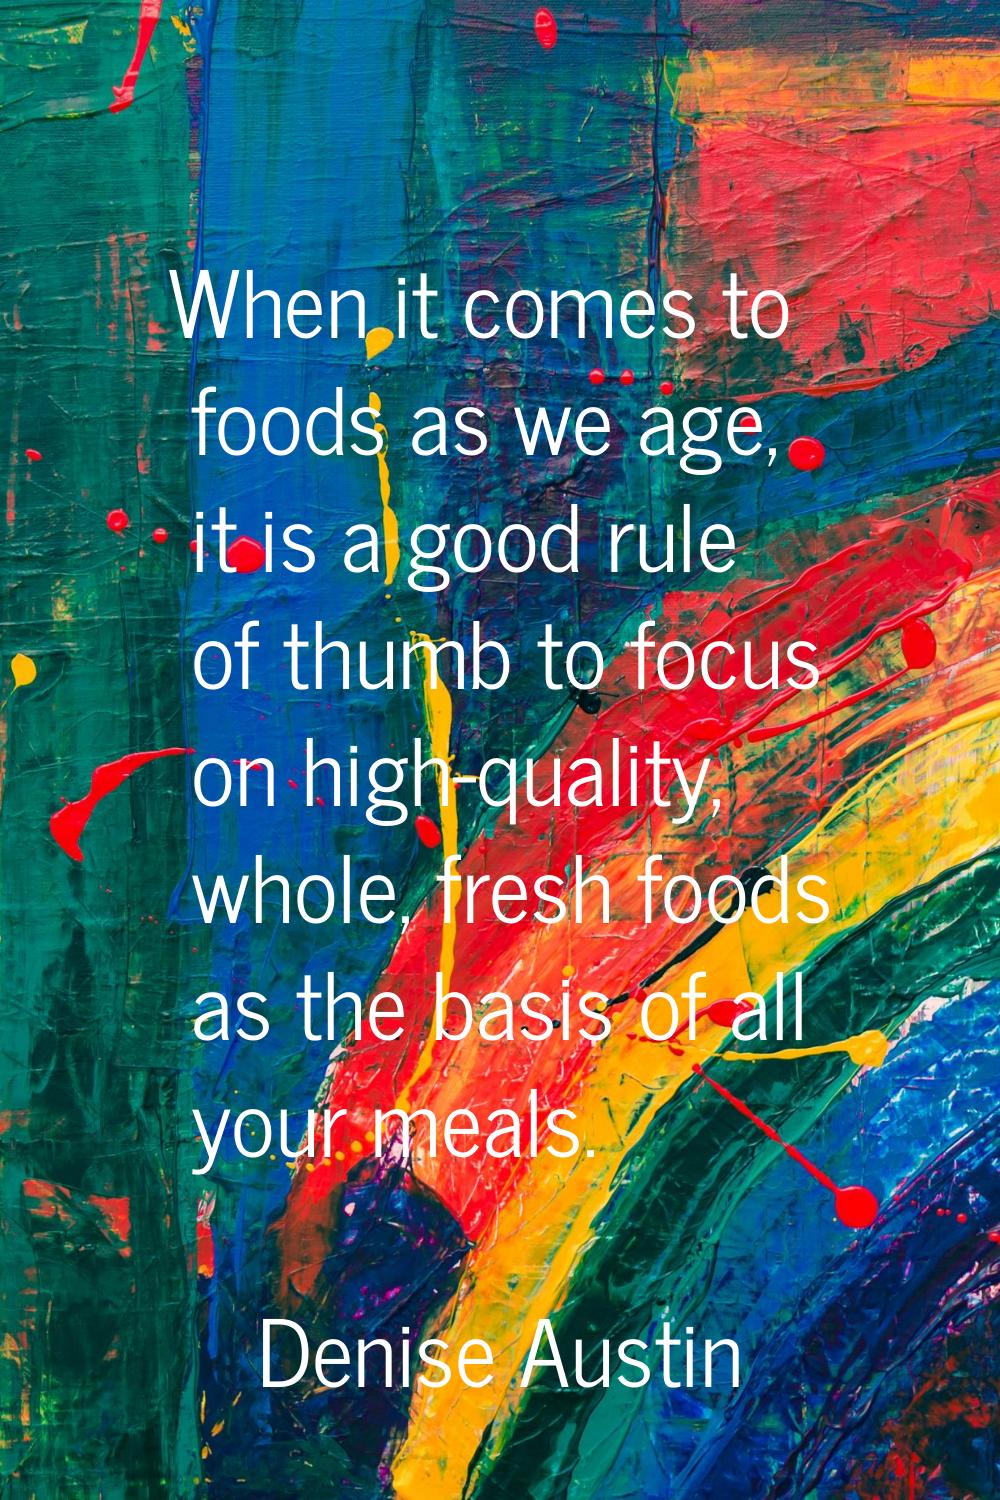 When it comes to foods as we age, it is a good rule of thumb to focus on high-quality, whole, fresh